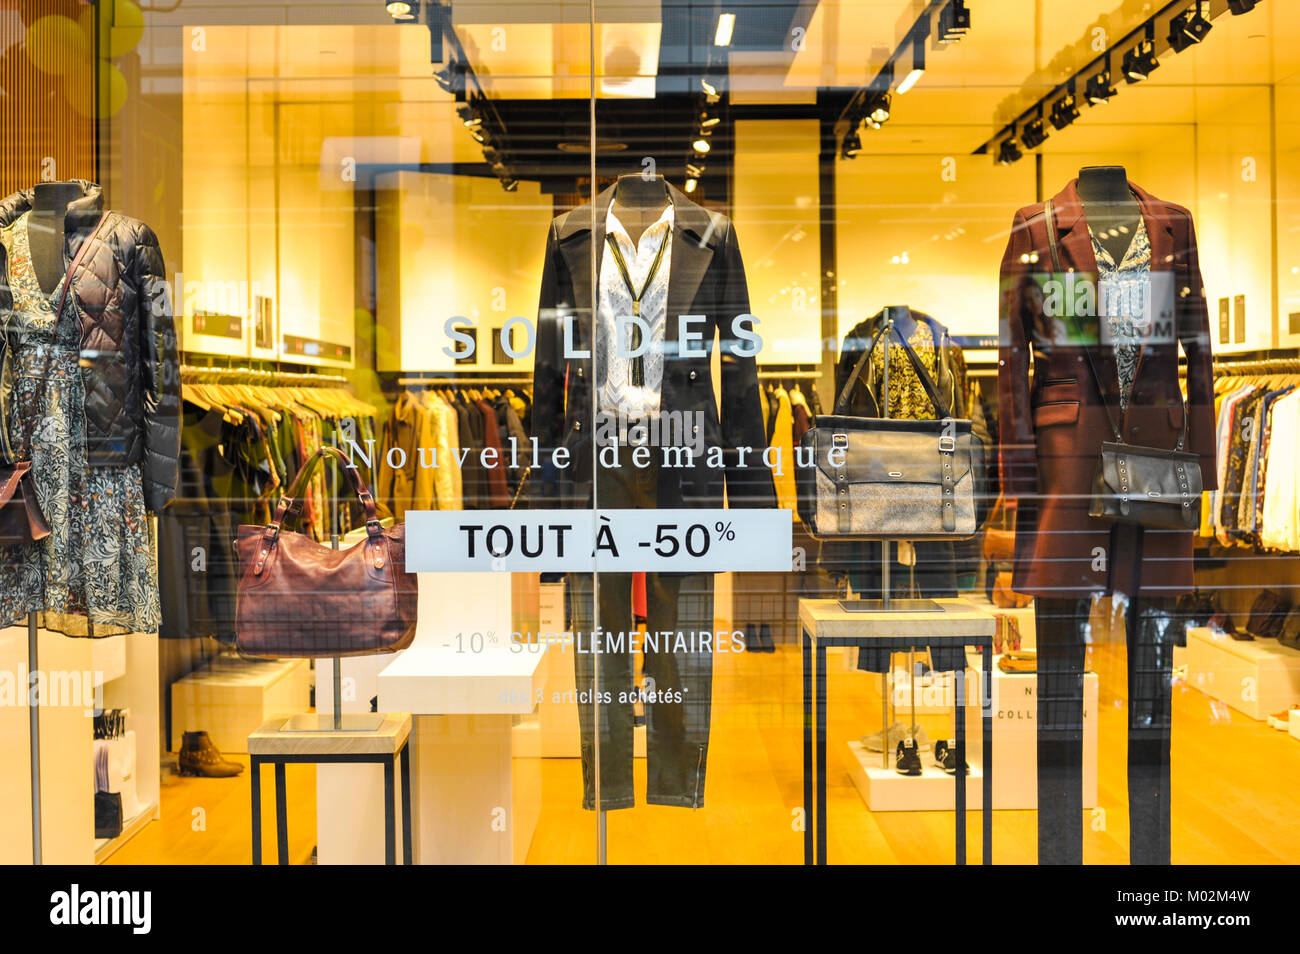 Sale (soldes in french) sign in a fashion shop window. Auchan Supermarket,  Luxembourg Stock Photo - Alamy